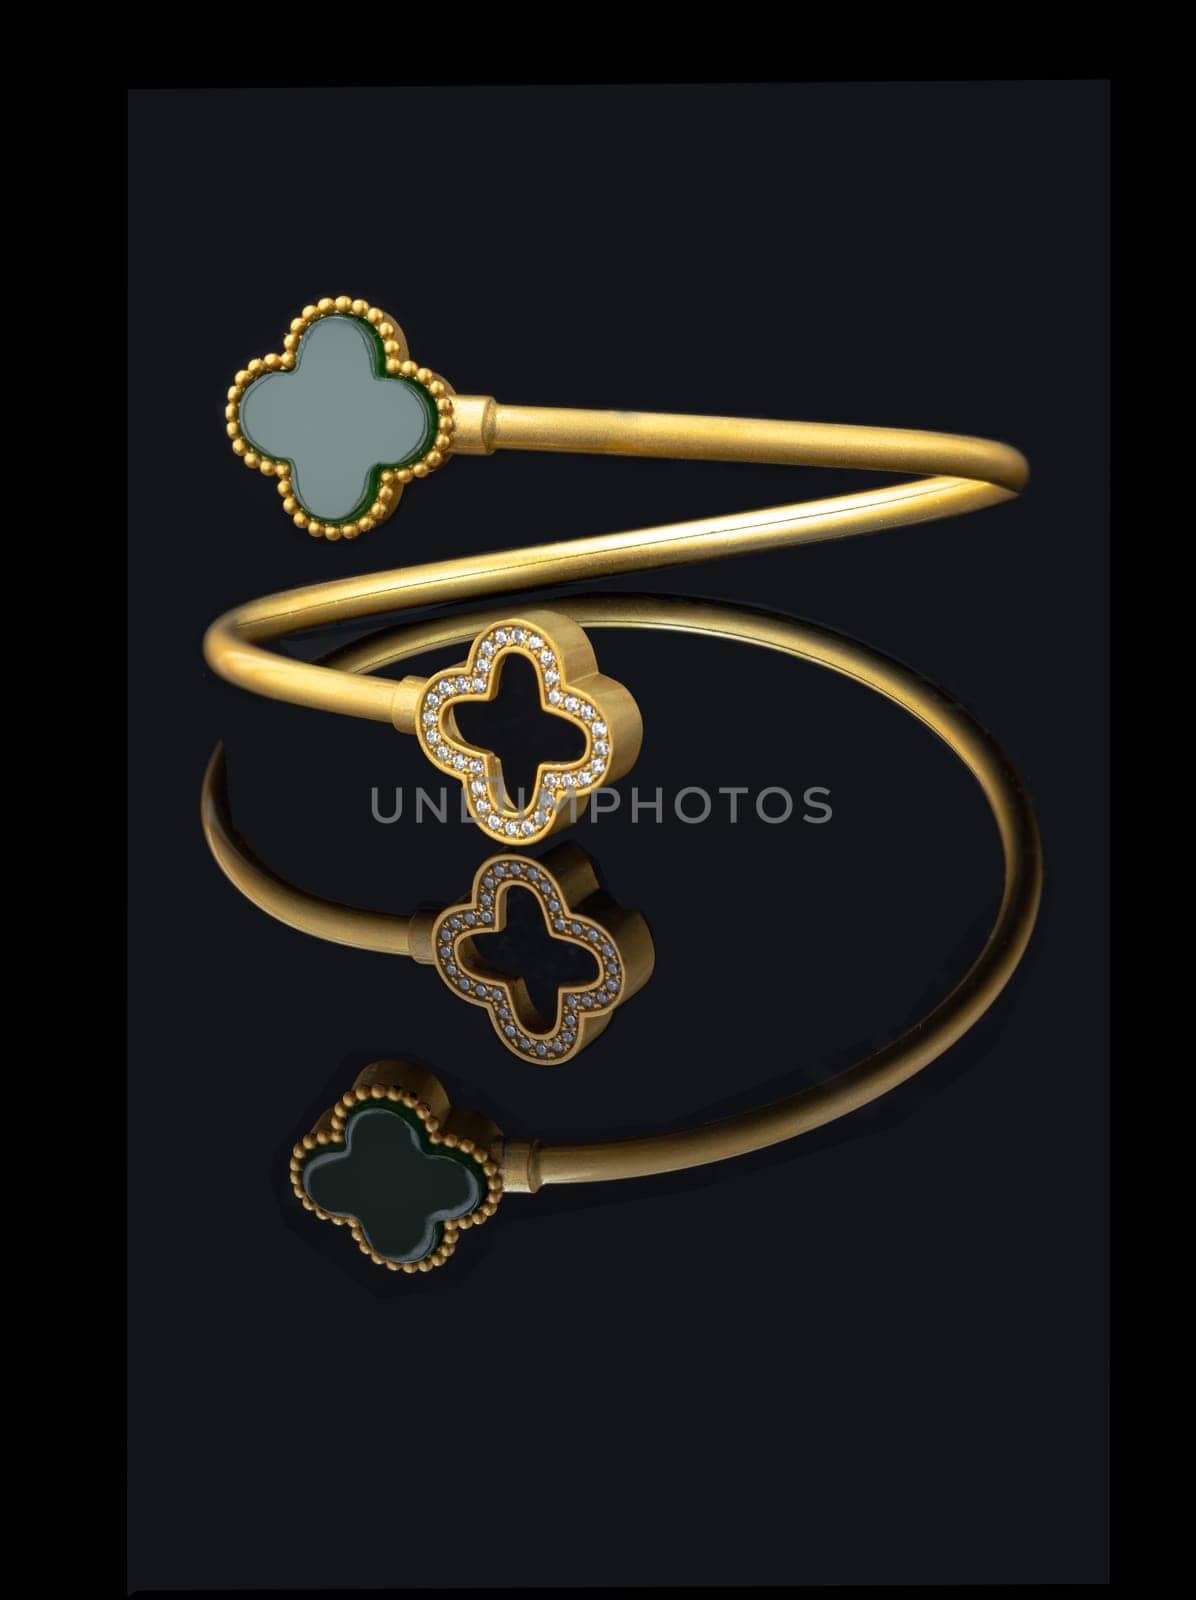 Bangkok, Thailand - Apr 03, 2023 - Romantic Beautiful Gold Bracelet with Jade and Many Precious Diamonds Shown on a Black Reflection Background. Elegant Woman Jewelry is isolated on the Black Color Background, Special Occasion Accessories. Space for text.